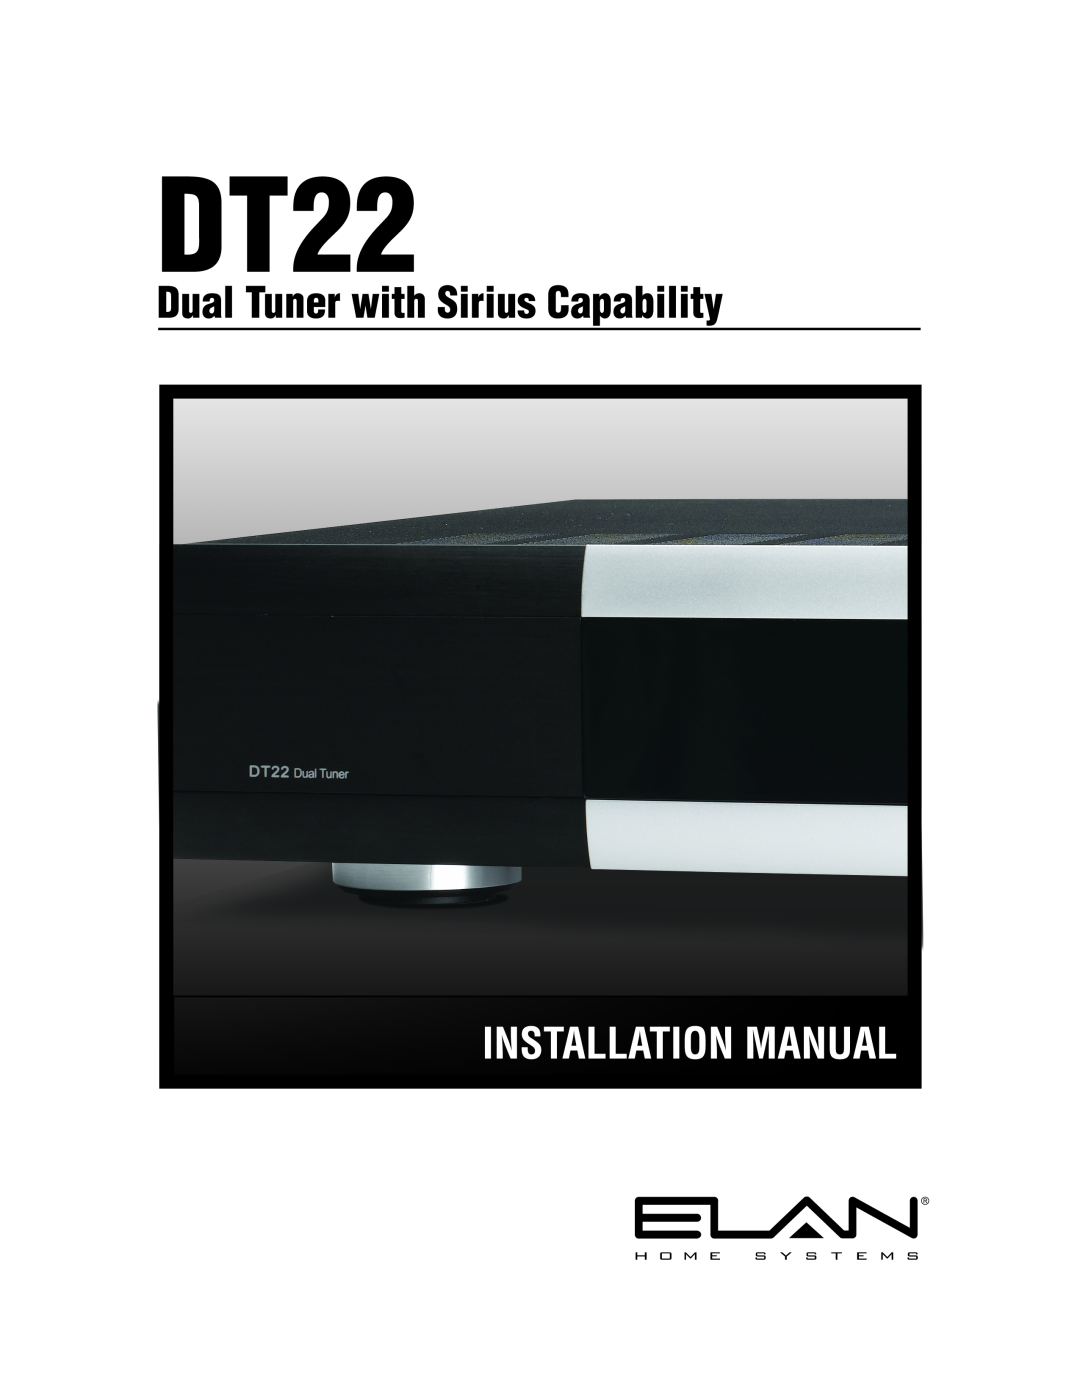 ELAN Home Systems DT22 manual 